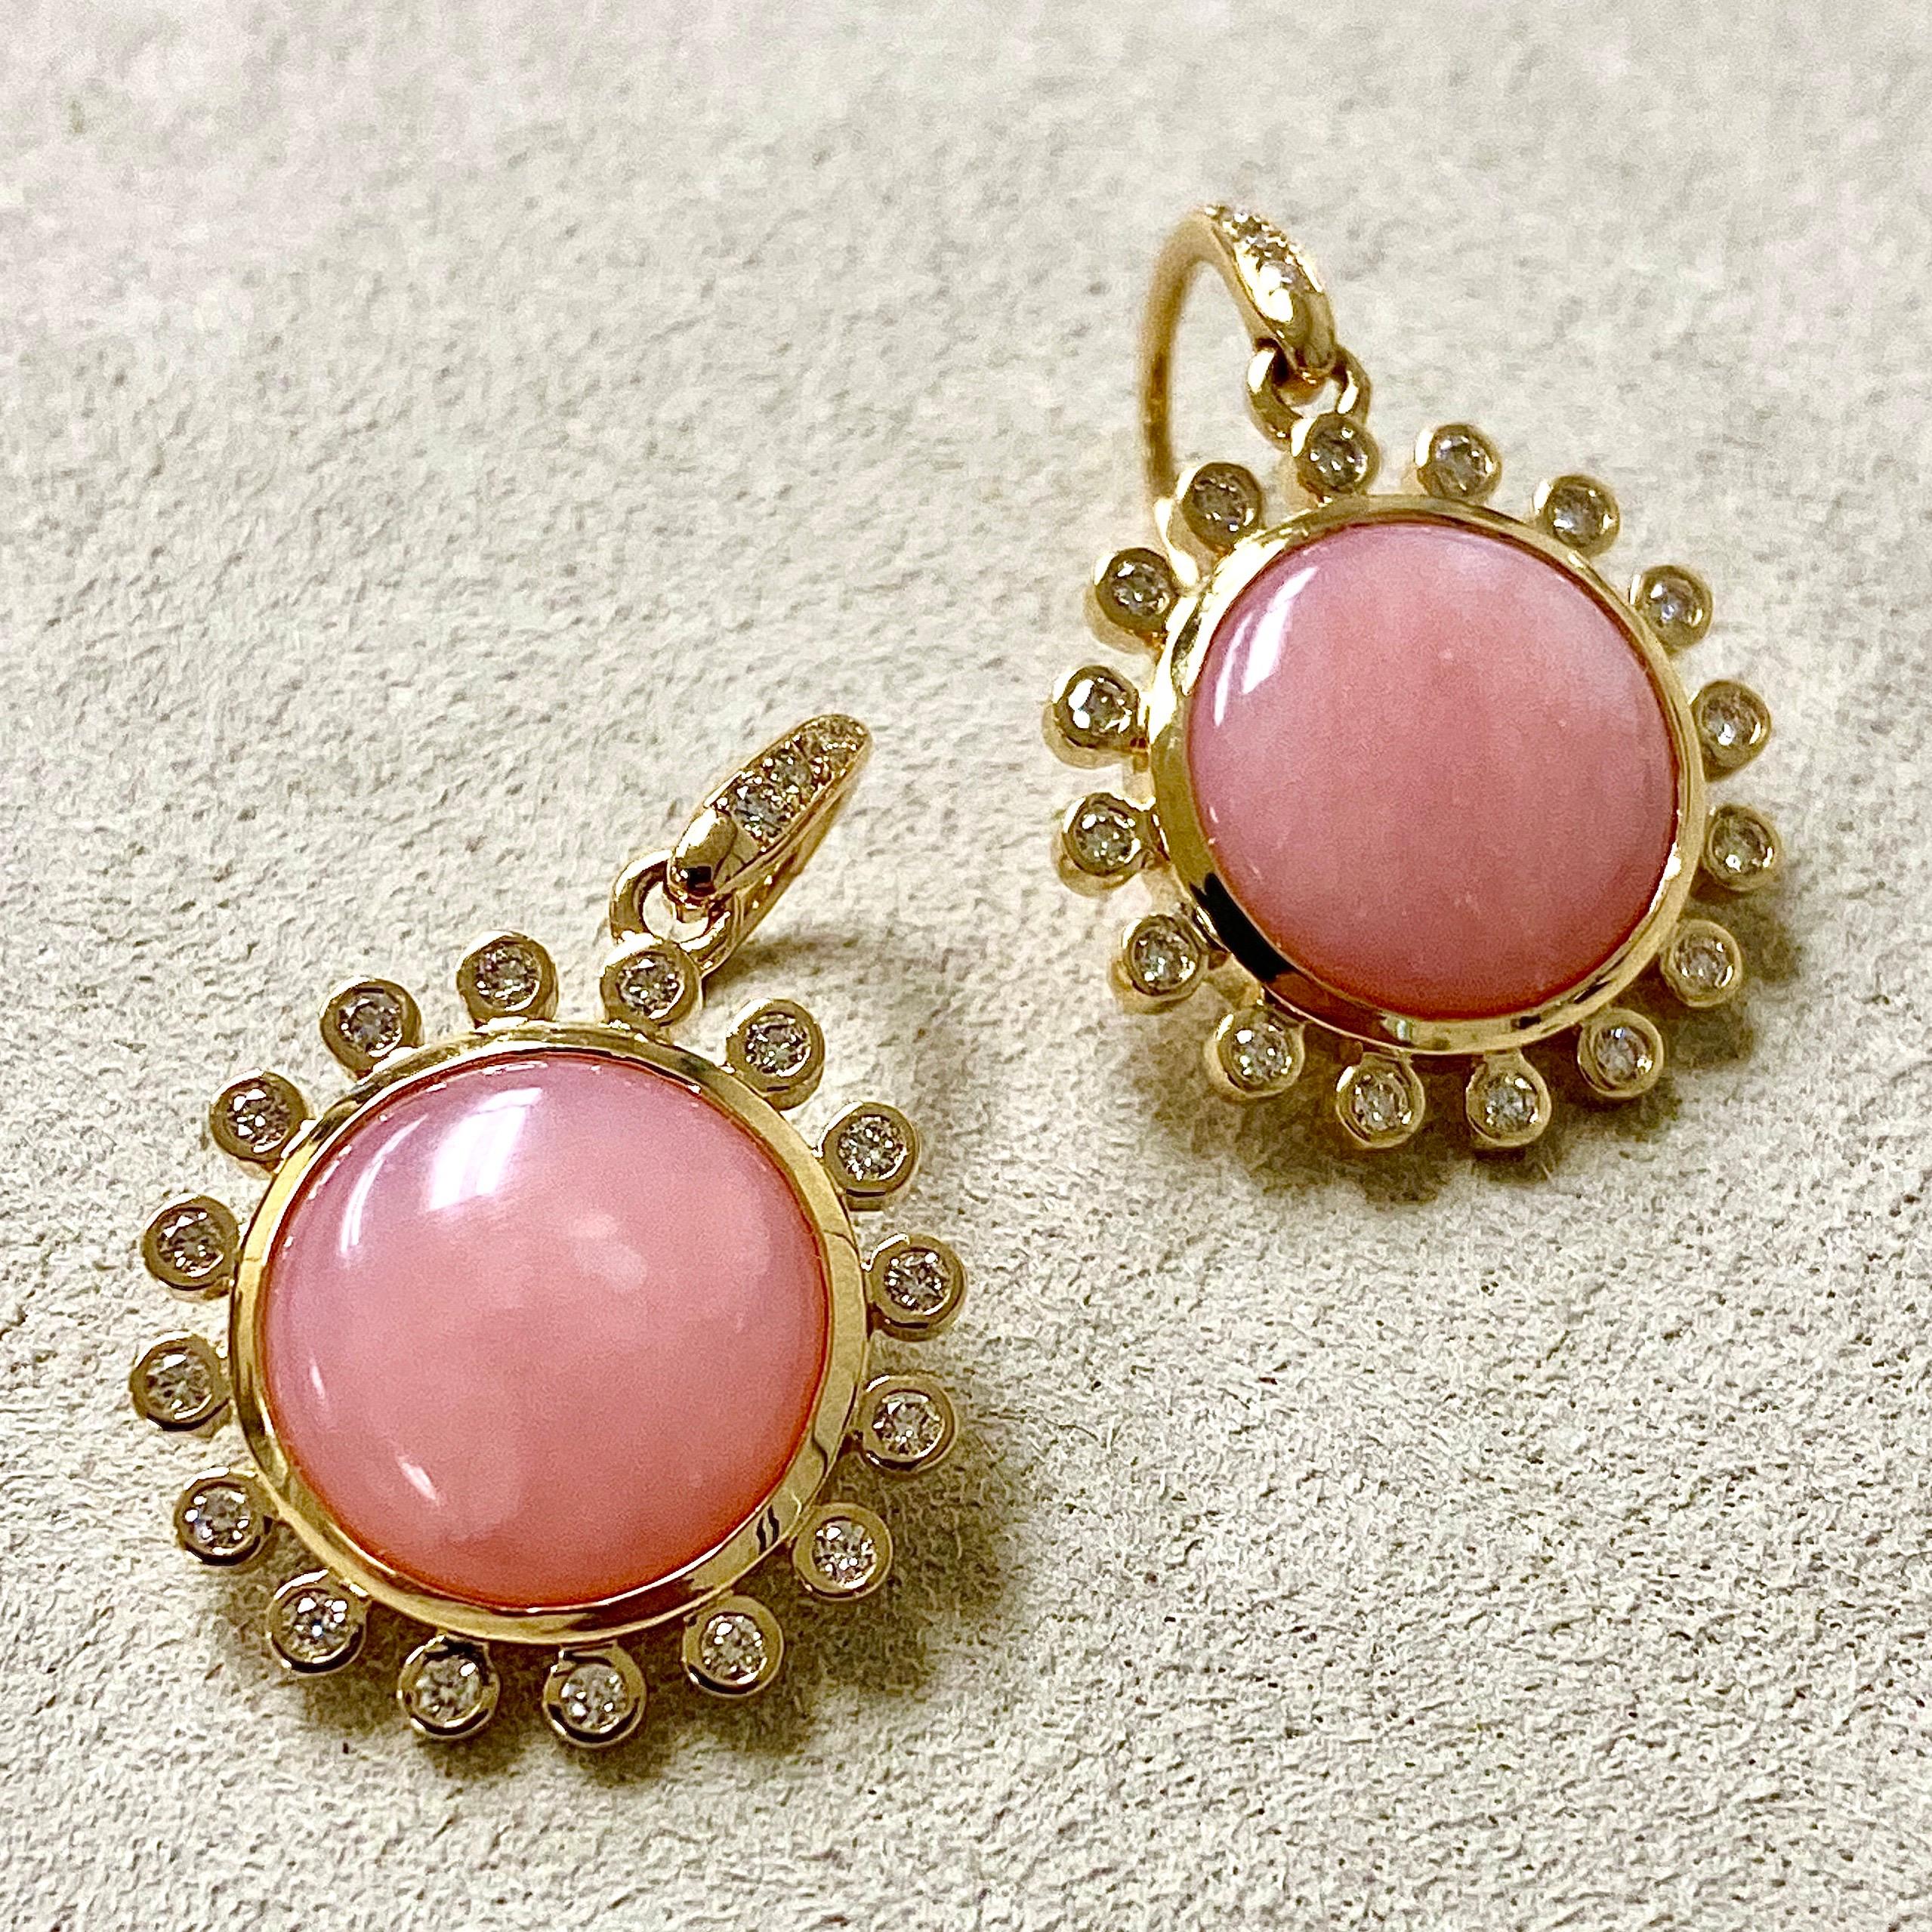 Created in 18kyg
Pink Opals 6 cts approx
Diamonds 0.40 ct approx
One of a kind

Designed to evoke both timeless sophistication and modern vibrancy, these one-of-a-kind earrings boast 6 carats of pink opals and 0.40 carats of diamonds set in